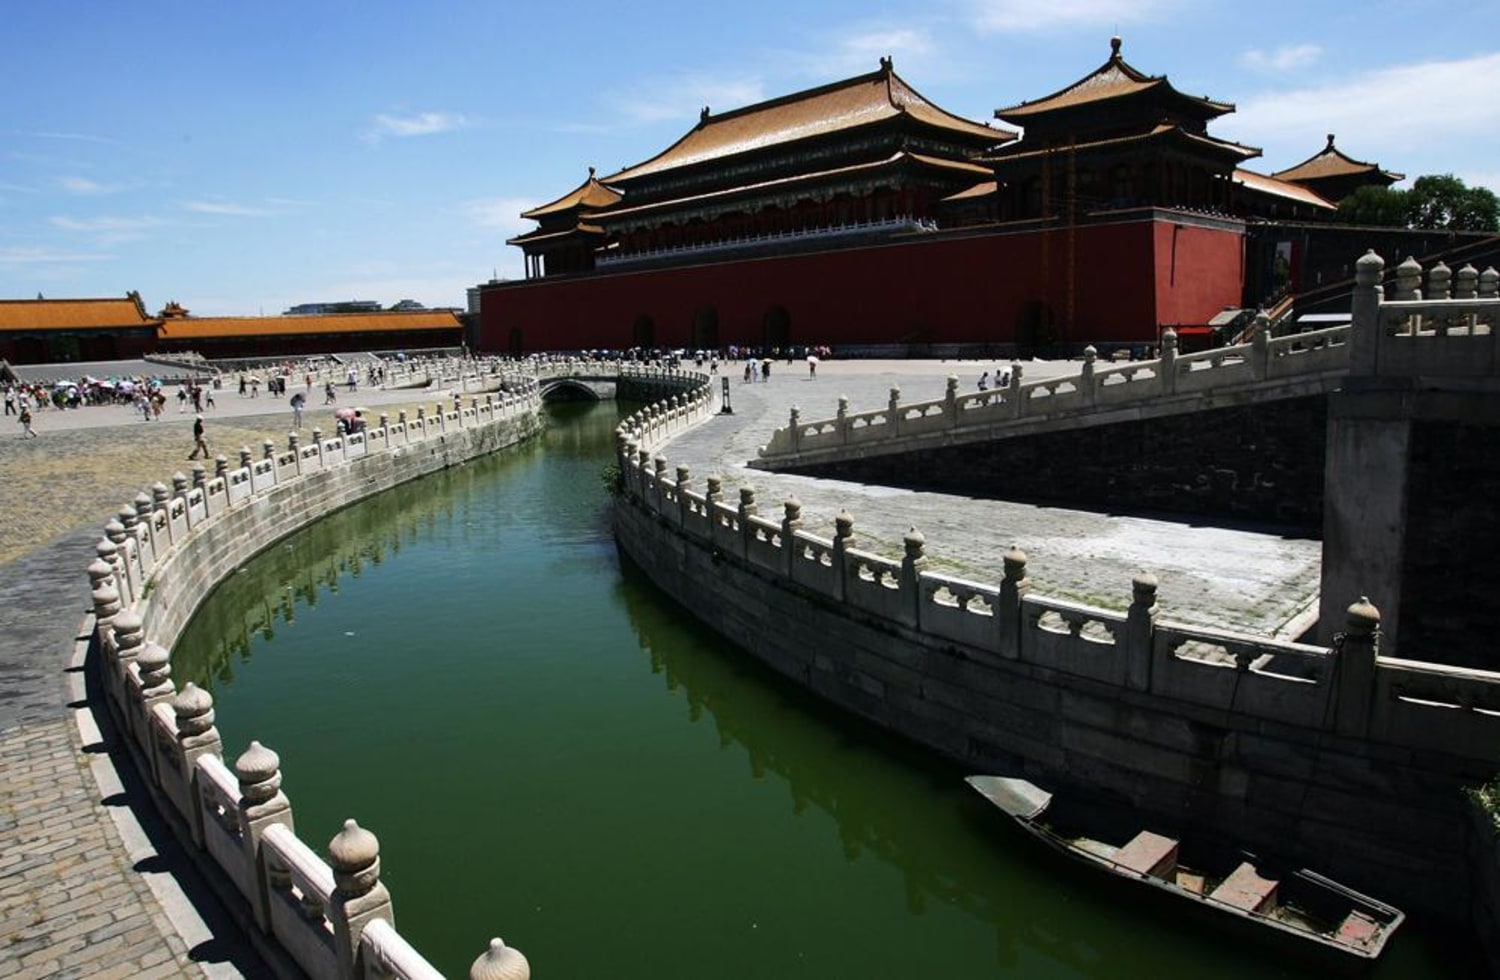 The Ultimate Discovery of The Forbidden City